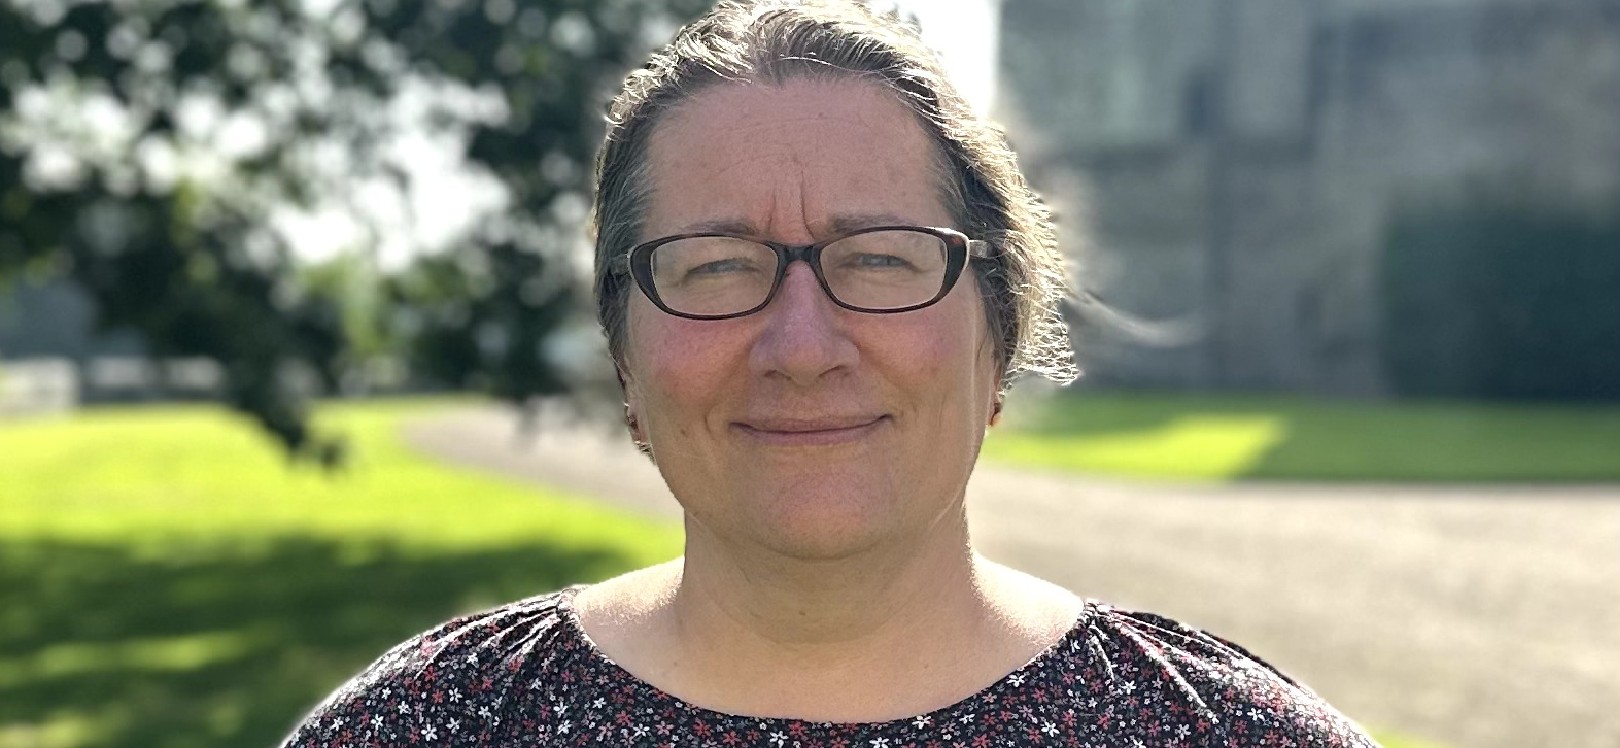 A portrait photograph of Victoria Cadman, Raby Estate's new sustainability manager. Victoria has her hair tied back and is wearing glasses. She is smiling at the camera.